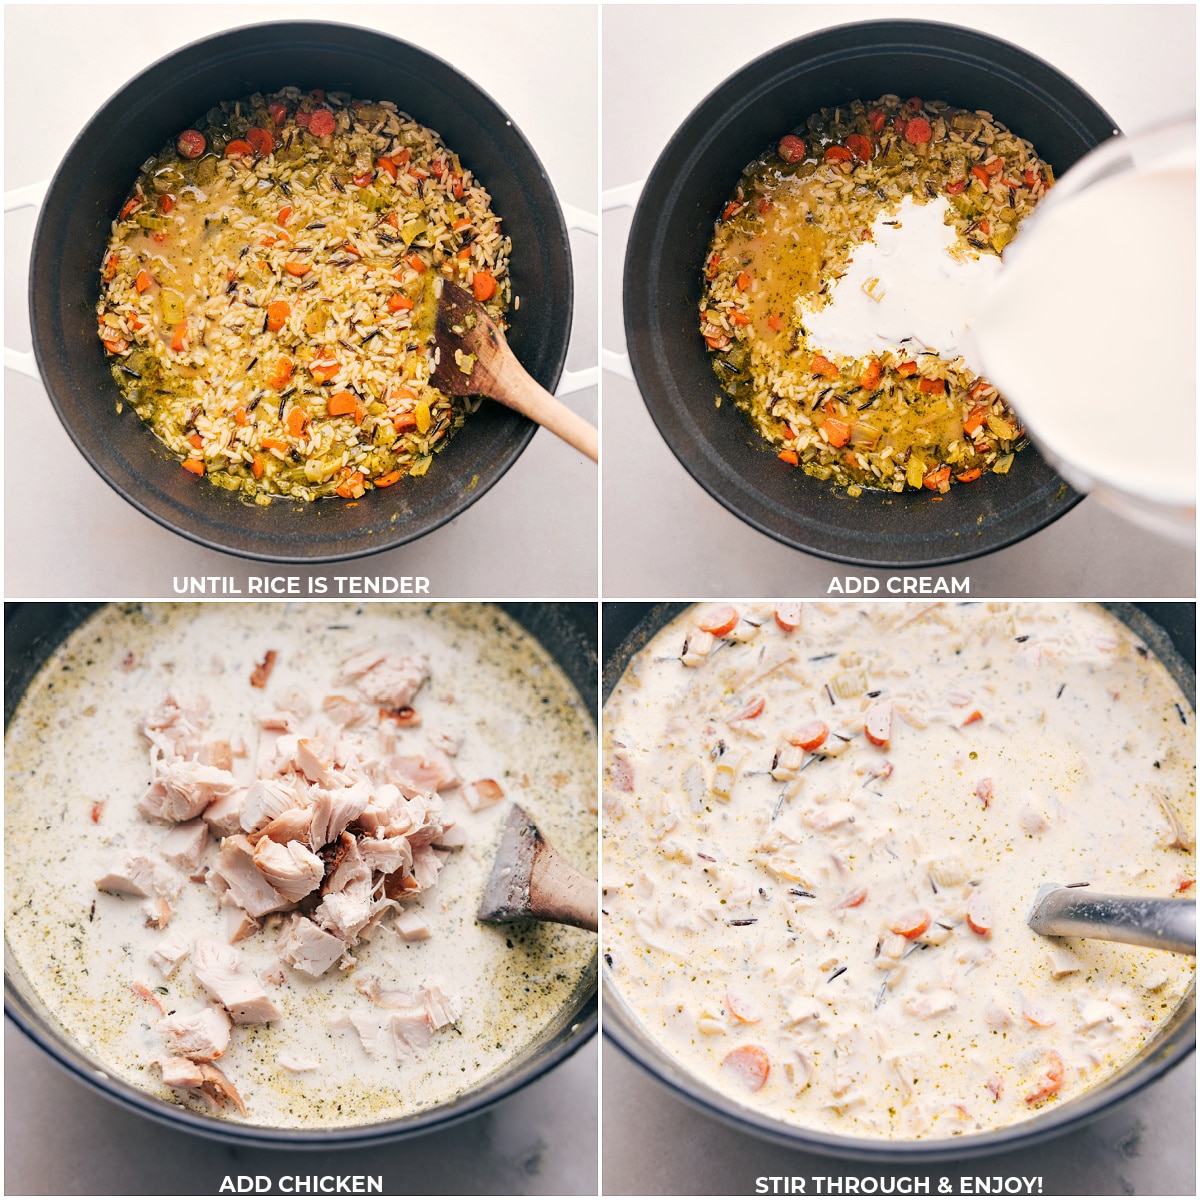 Cream and chicken being added to the pot for this dish.